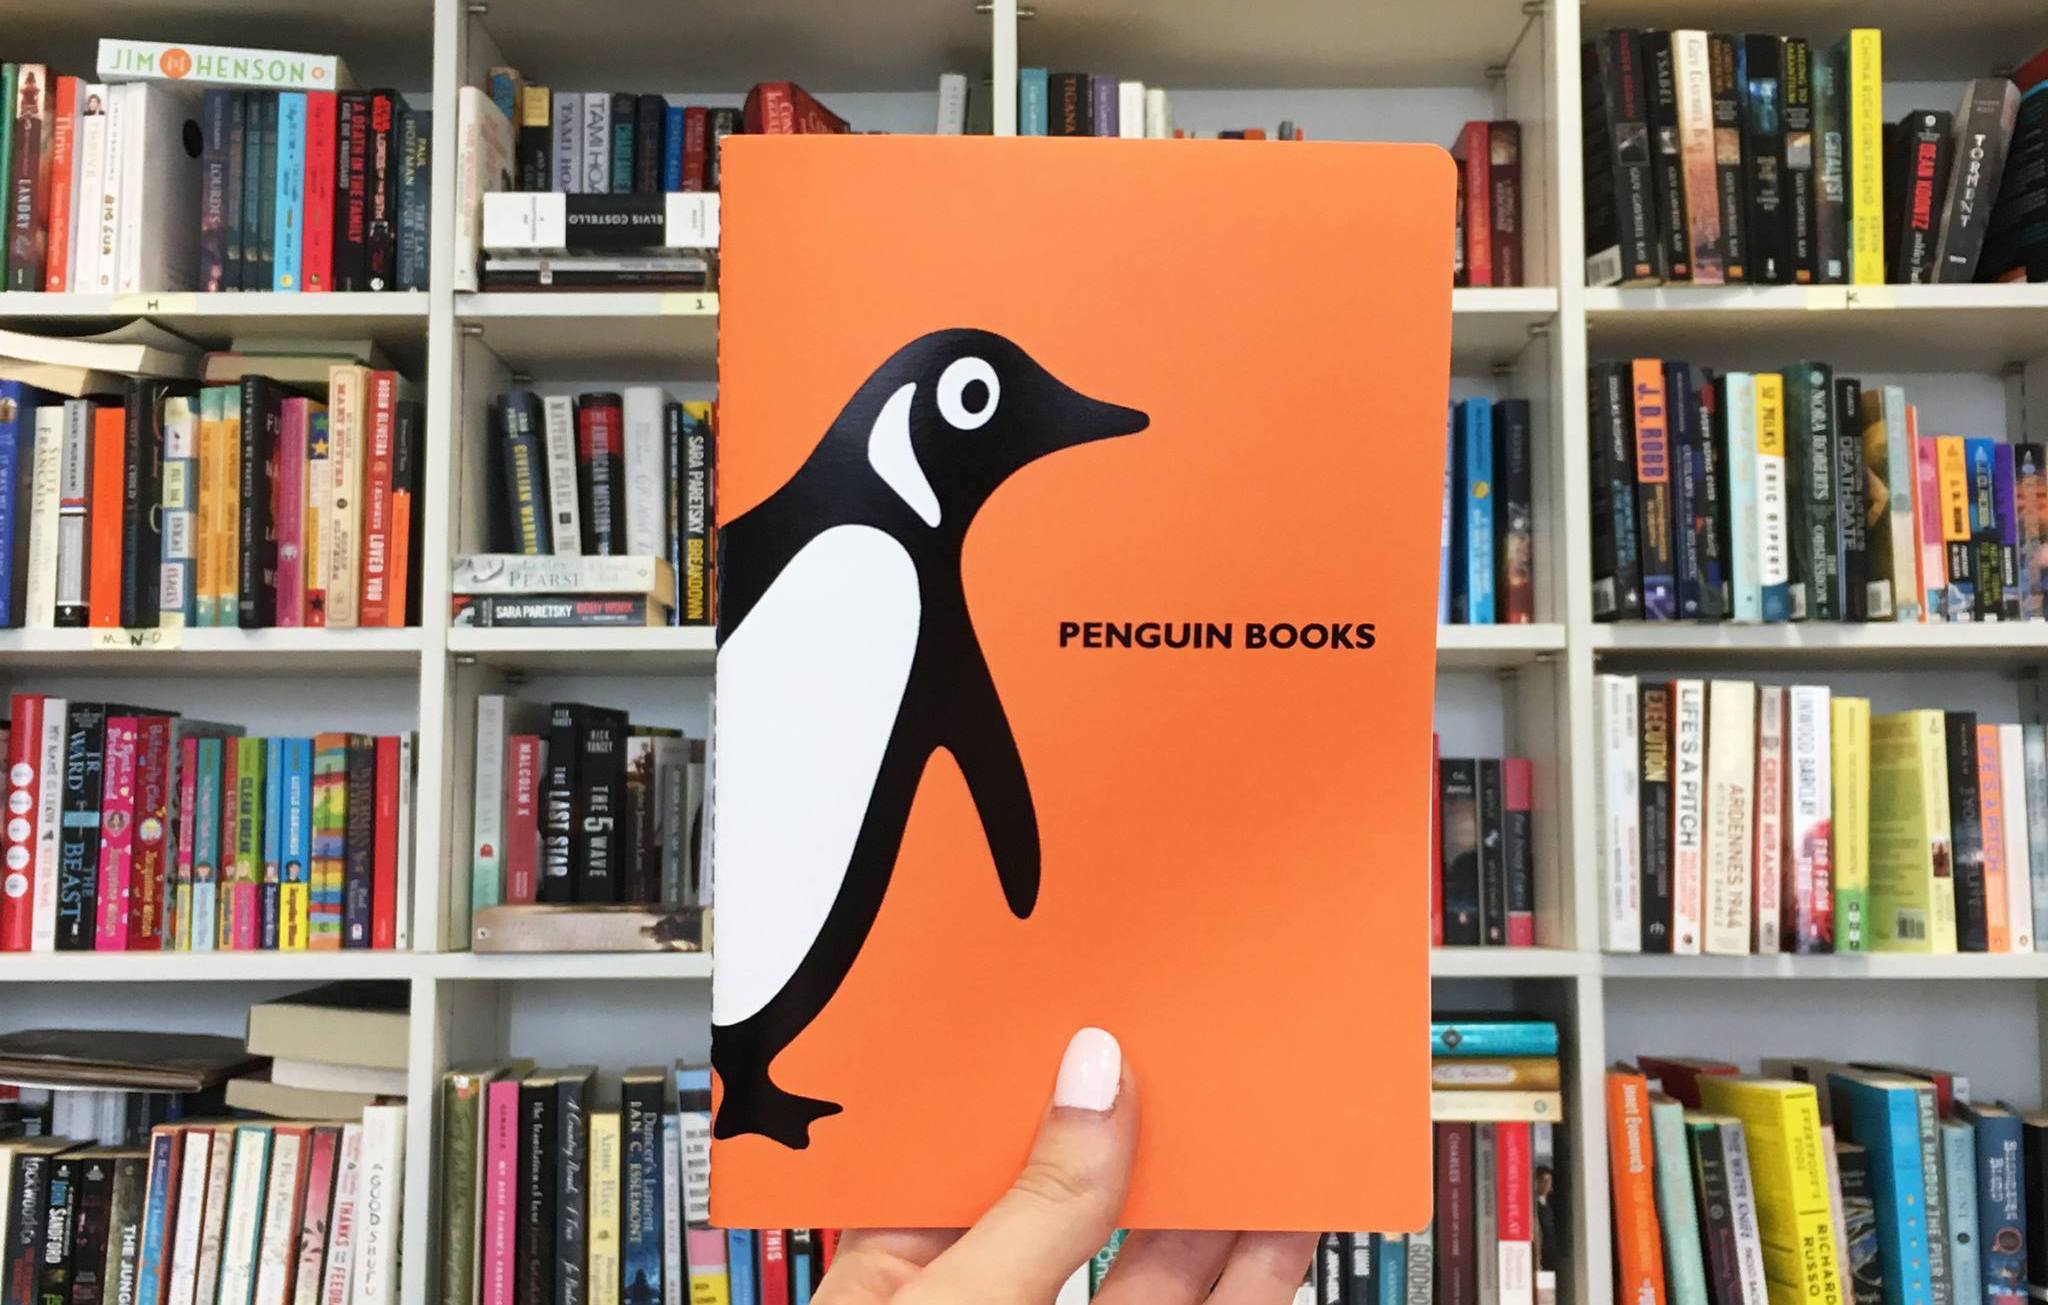 Tonight, There's 'Something For Everybody': Penguin Specials' Lena Petzke Celebrates Publishers' Anniversary at The Bookworm